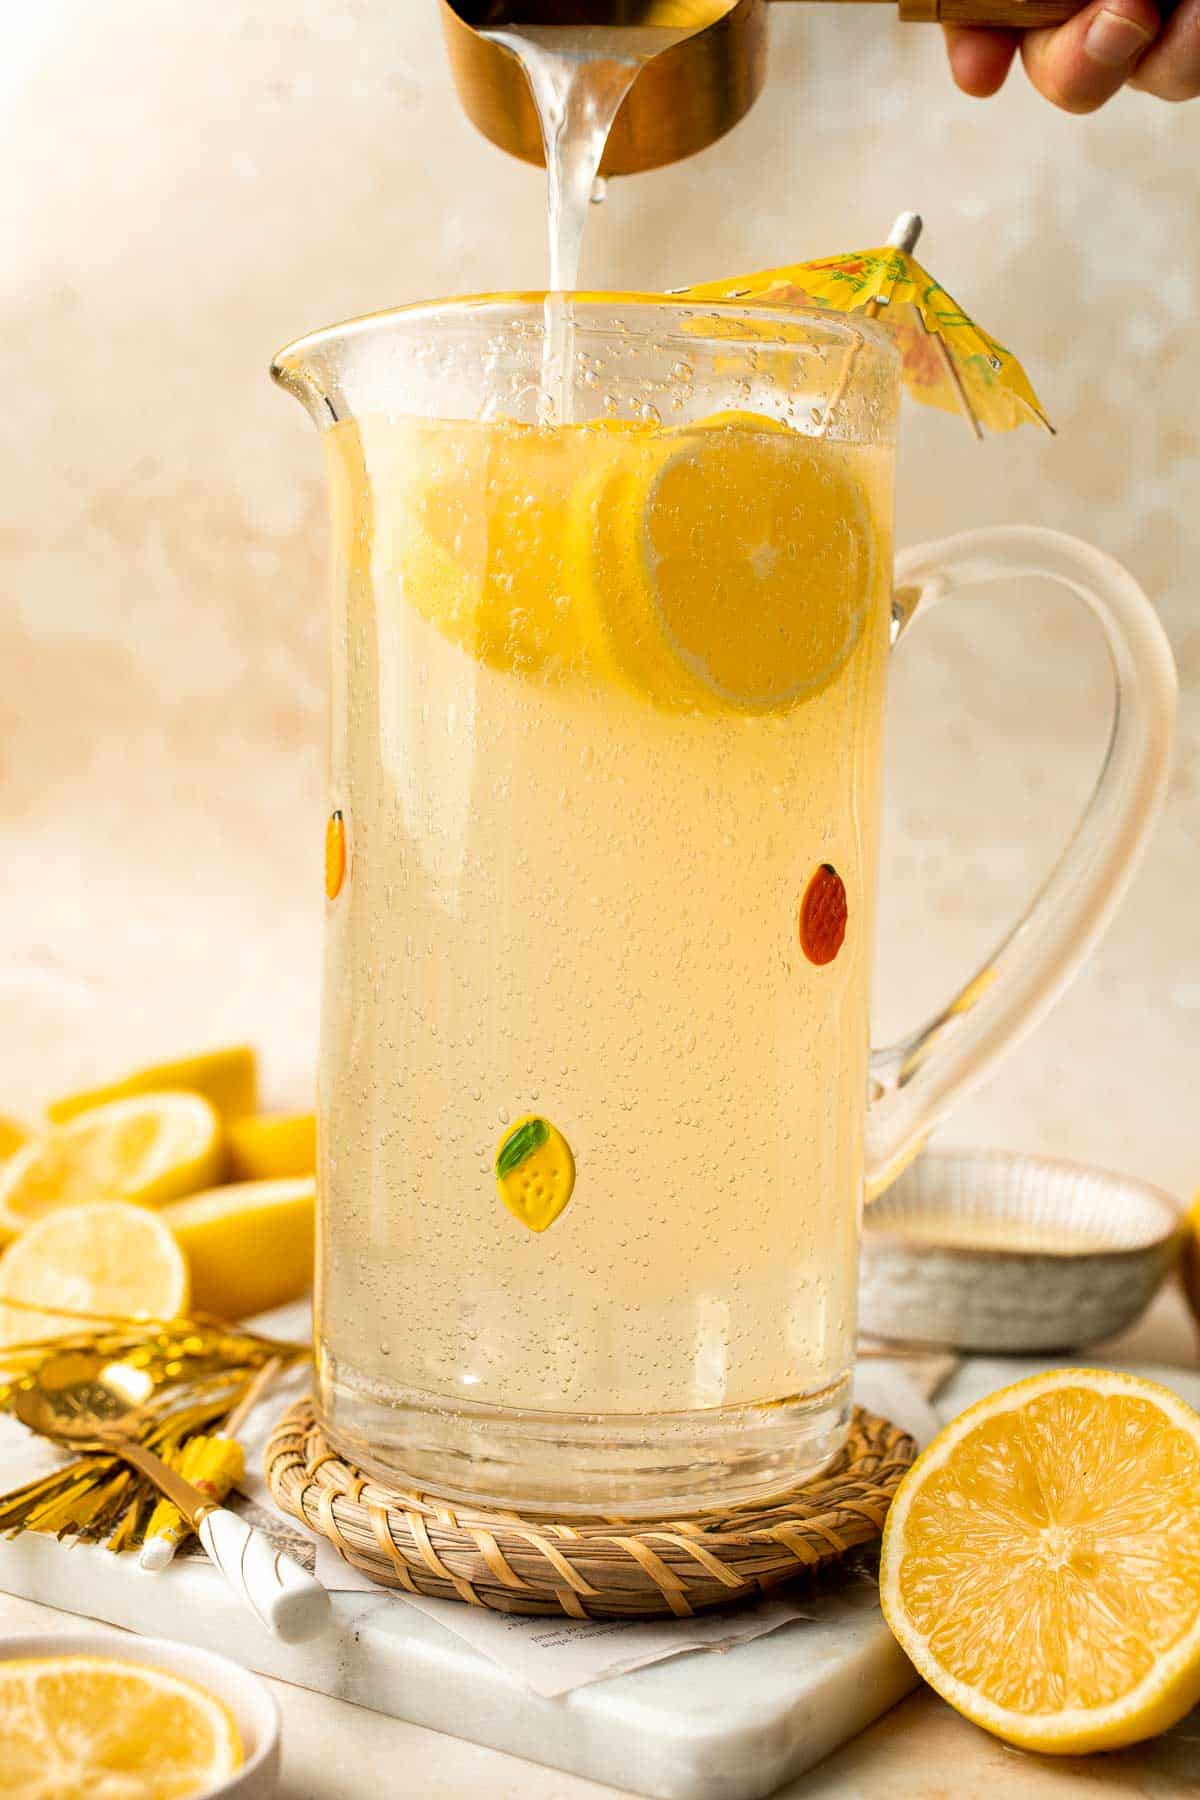 Homemade Lemonade is a fresh summer drink with the perfect balance of tart and sweet. It is easy to make from scratch with only 3 simple ingredients! | aheadofthyme.com